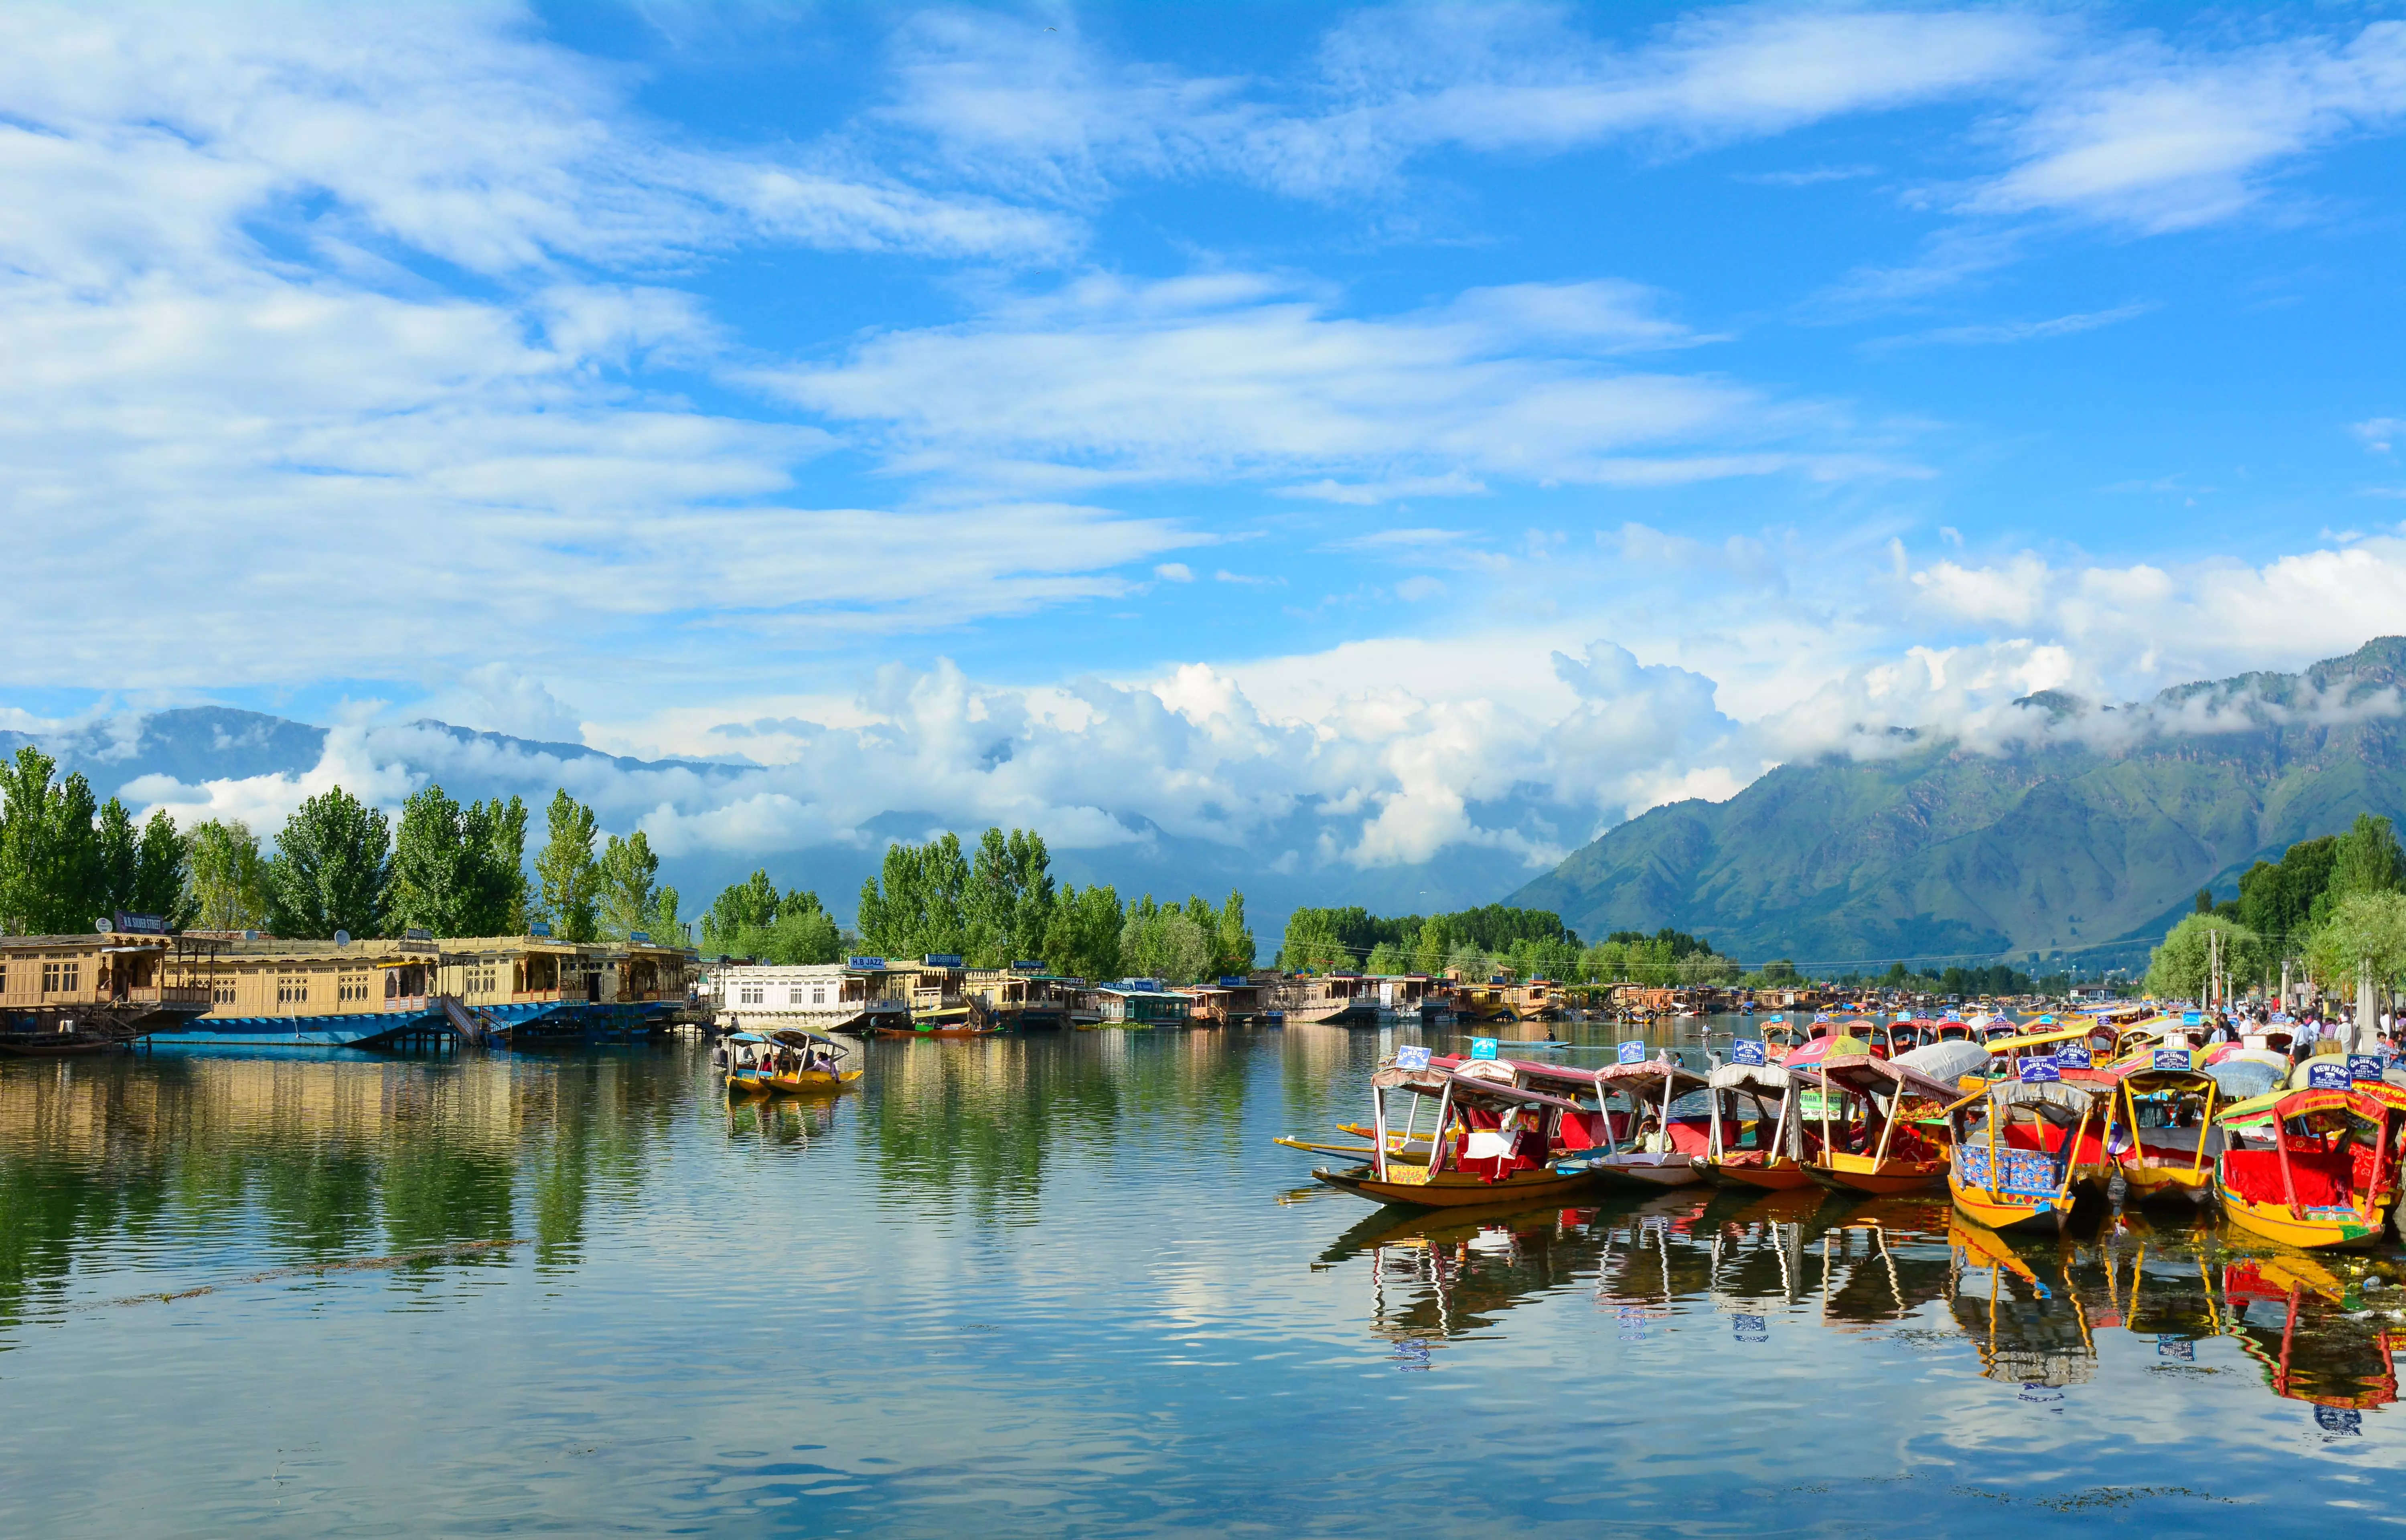 Research: Oyo reveals top 5 cultural destinations in 2022, Srinagar clocks  highest growth in bookings, ET TravelWorld